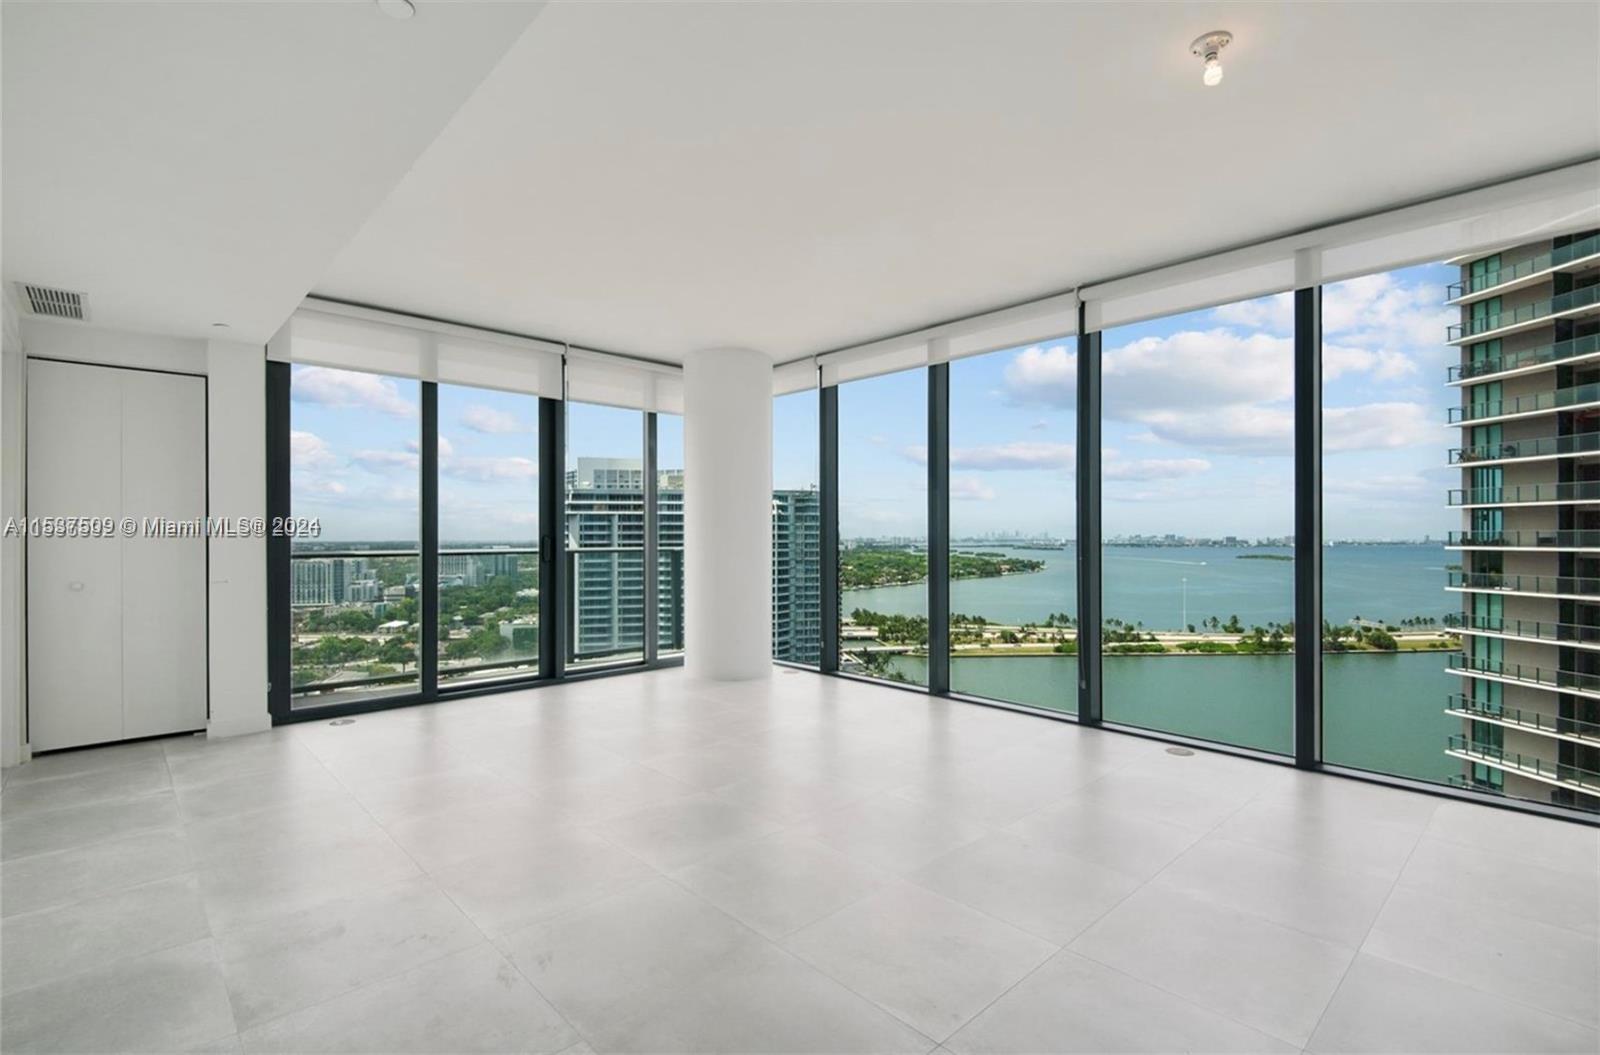 Enjoy this oversized 1 BR + 1 1/2 BA WITH spectacular bay views at the Paraiso Bay in Edgewater.  LA